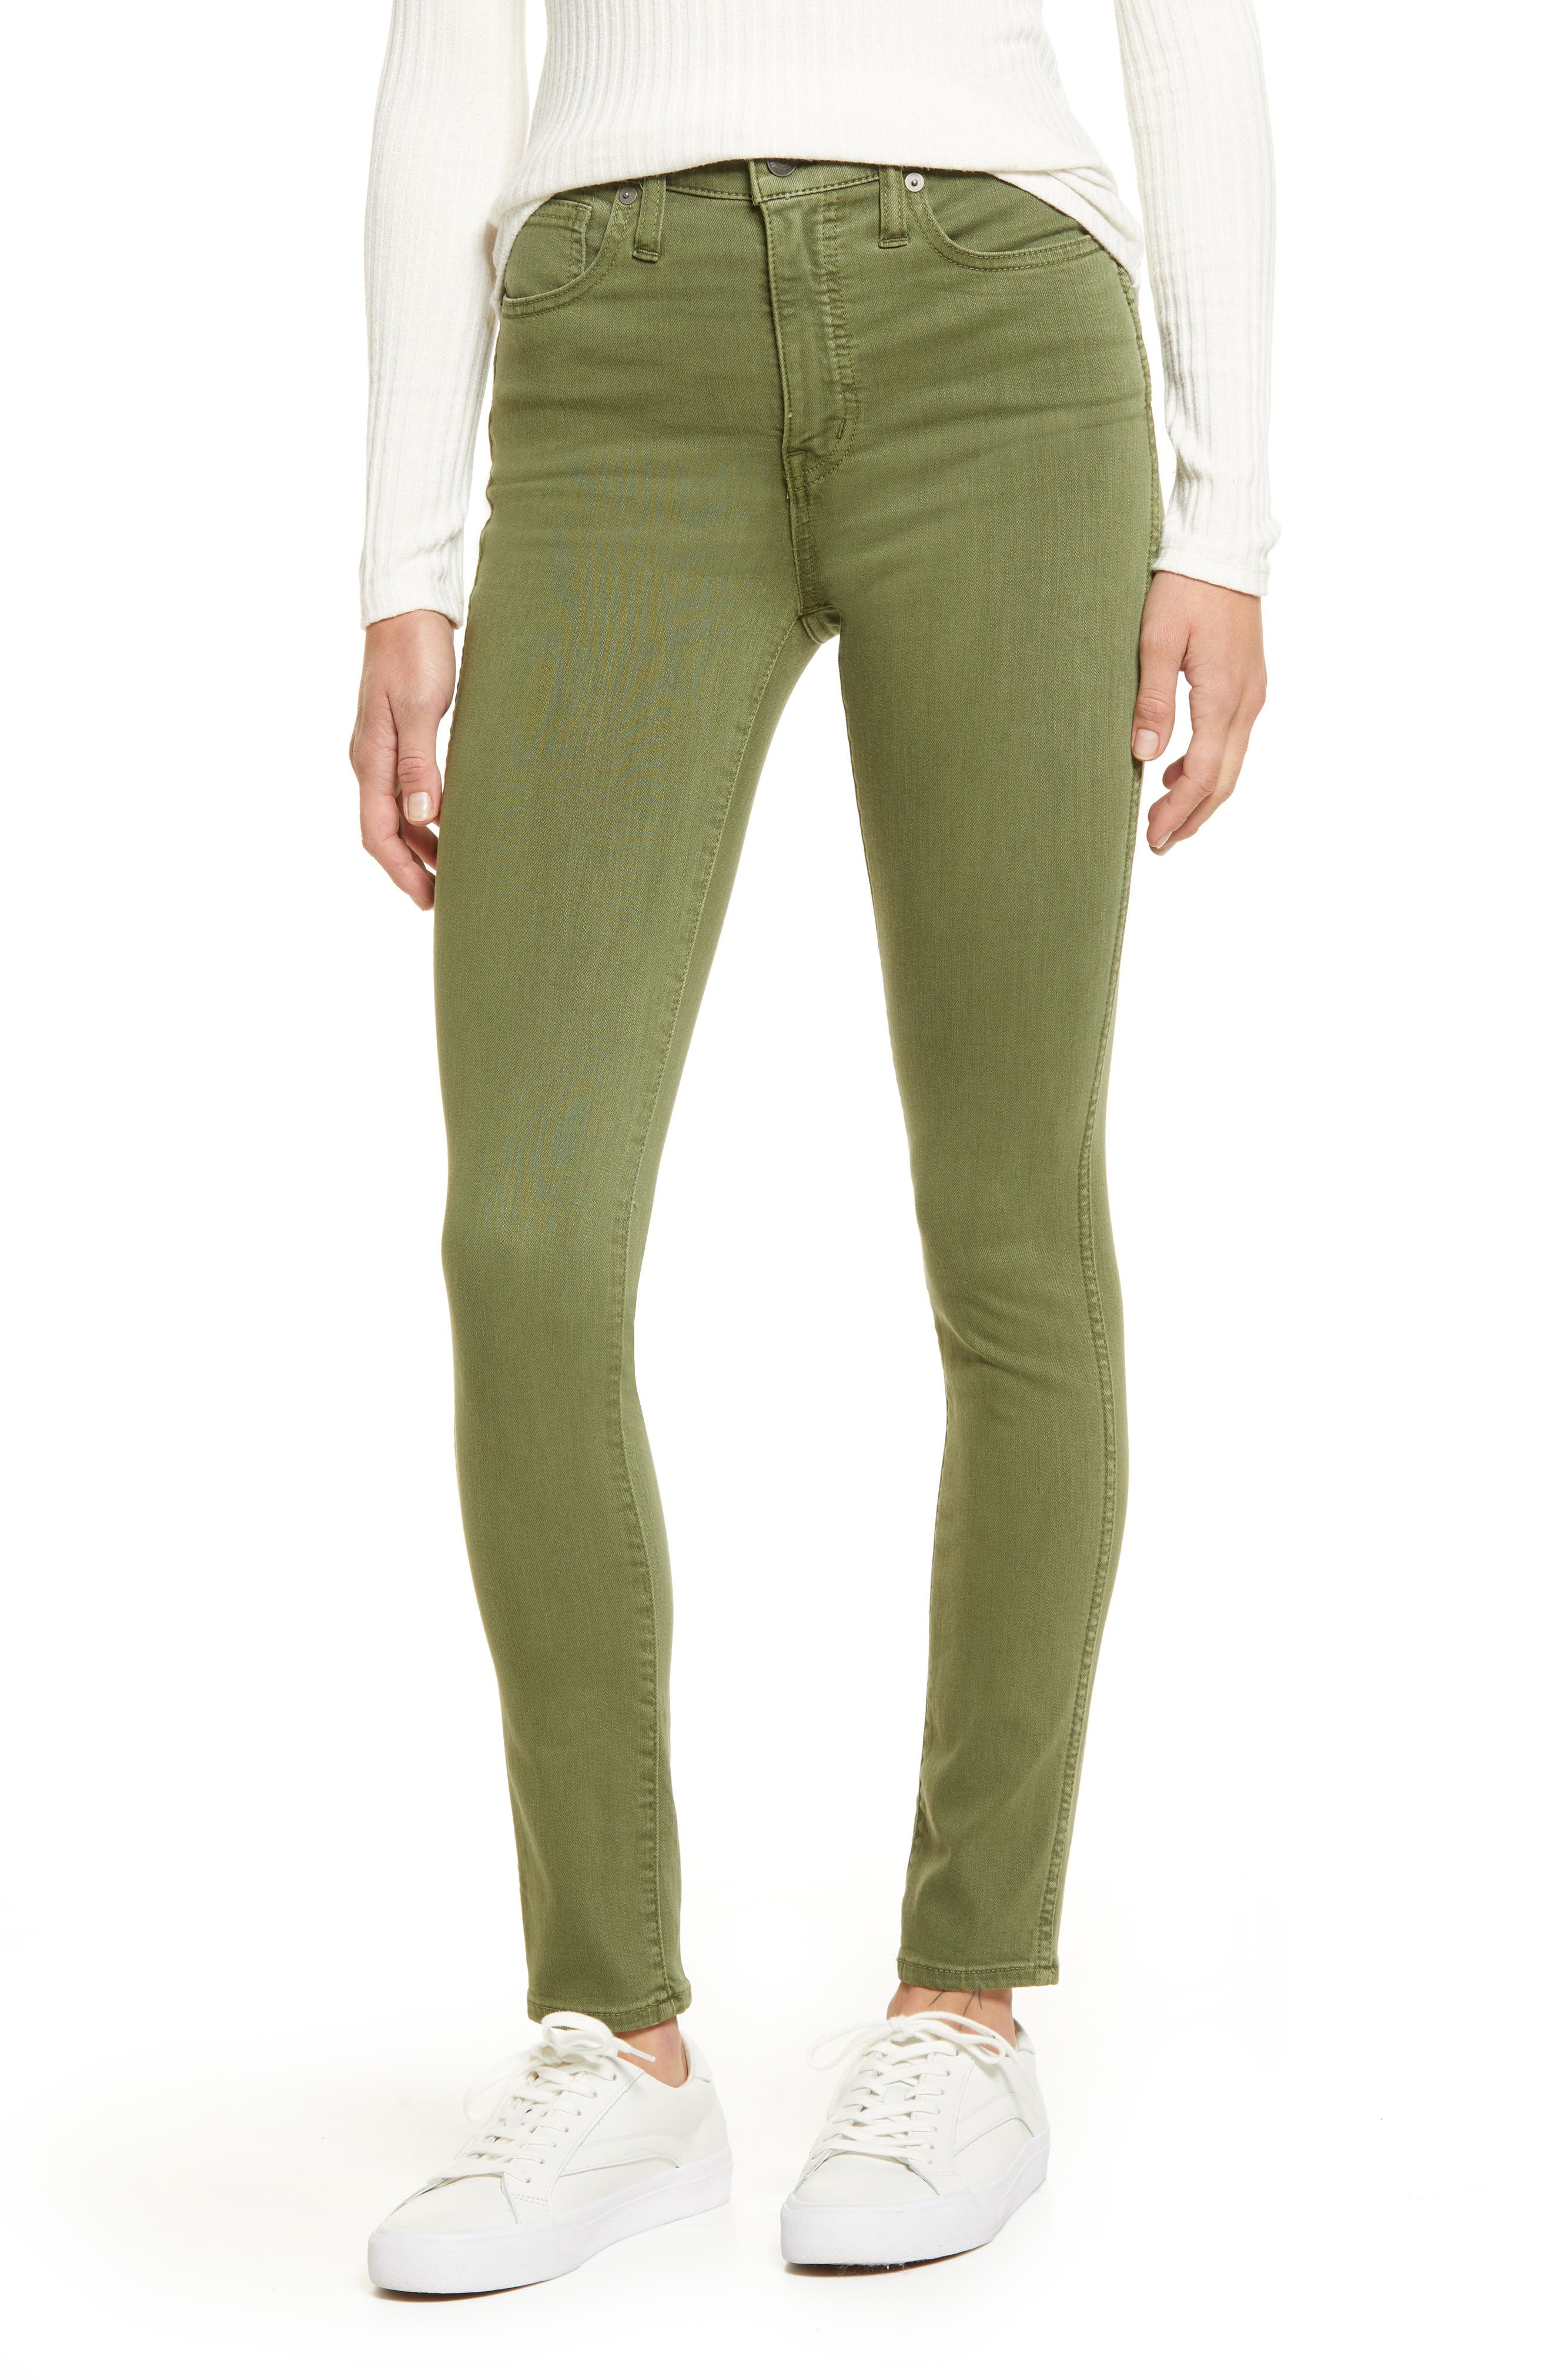 olive green jeans for ladies